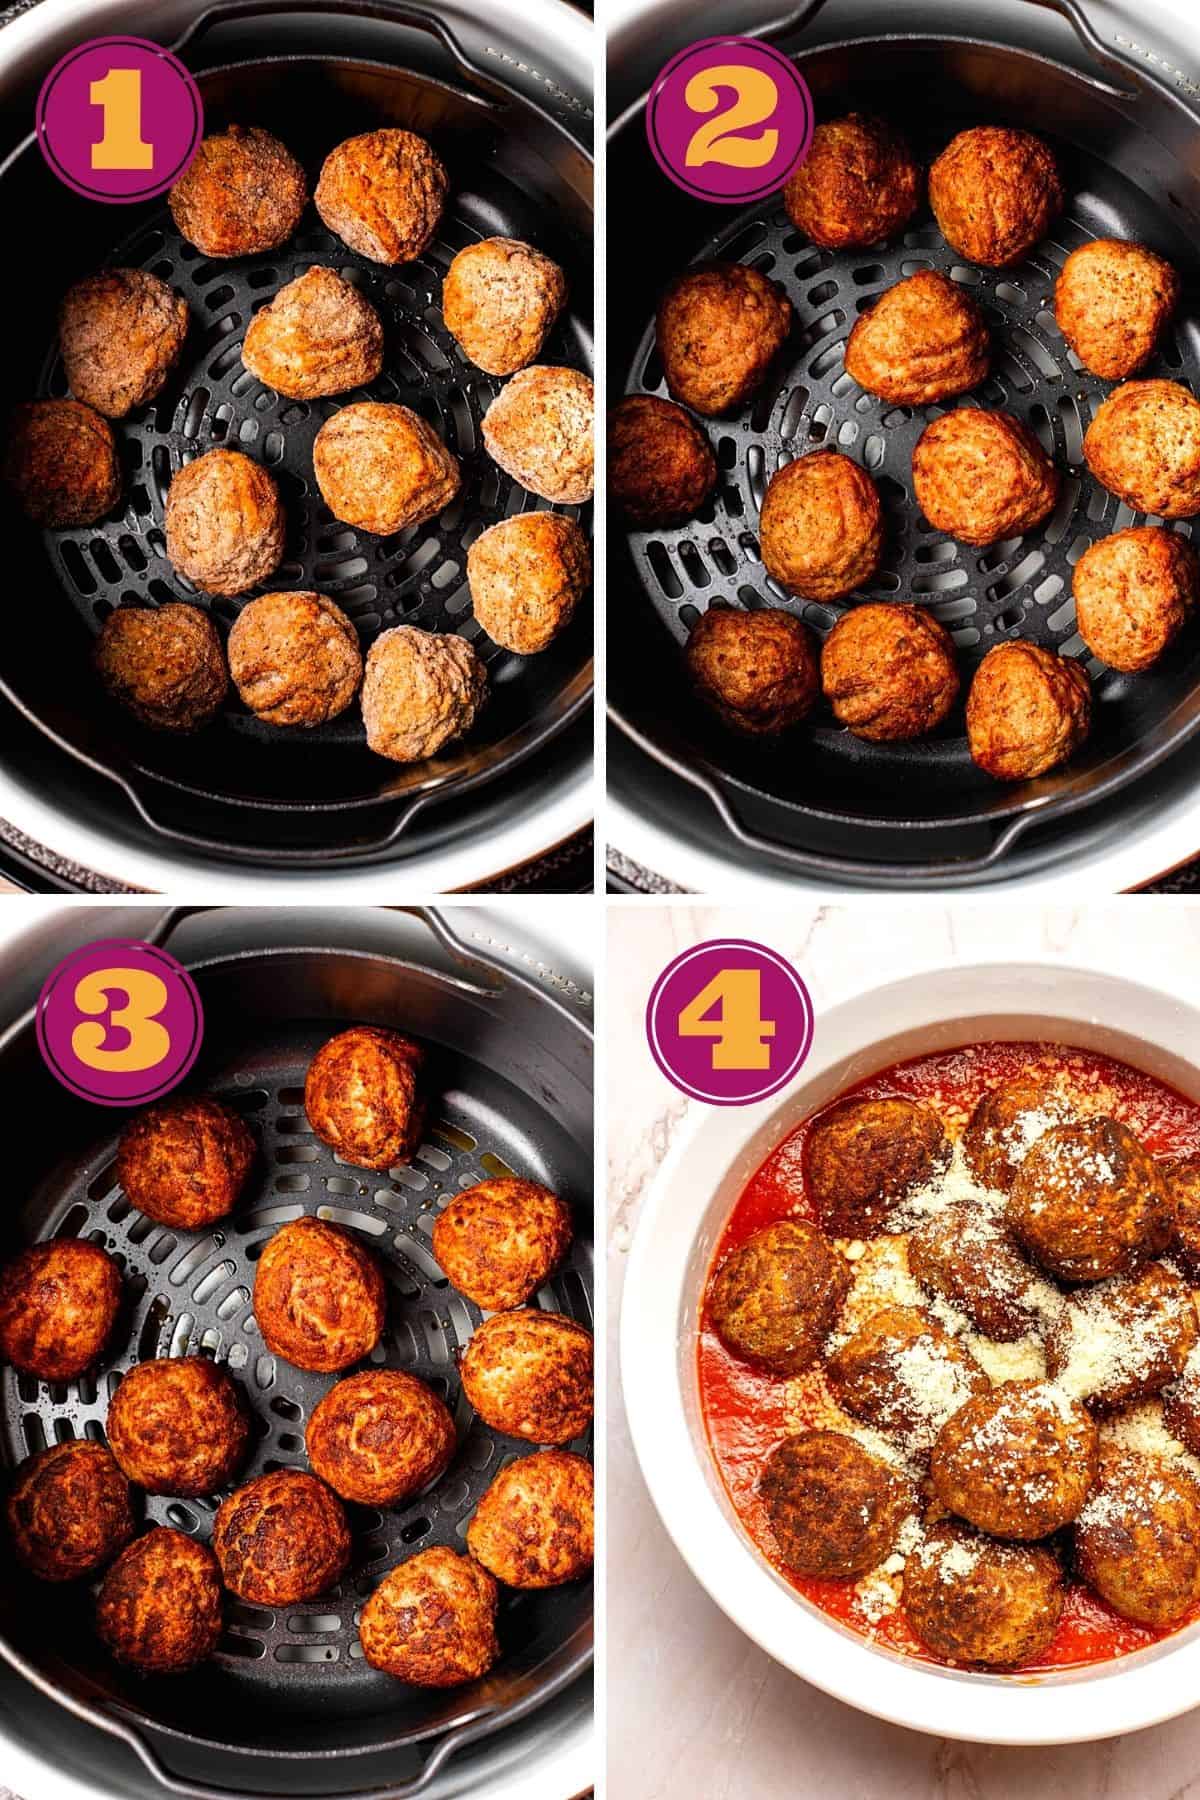 step by step process of cooking frozen meatballs in a Ninja Foodi air fryer